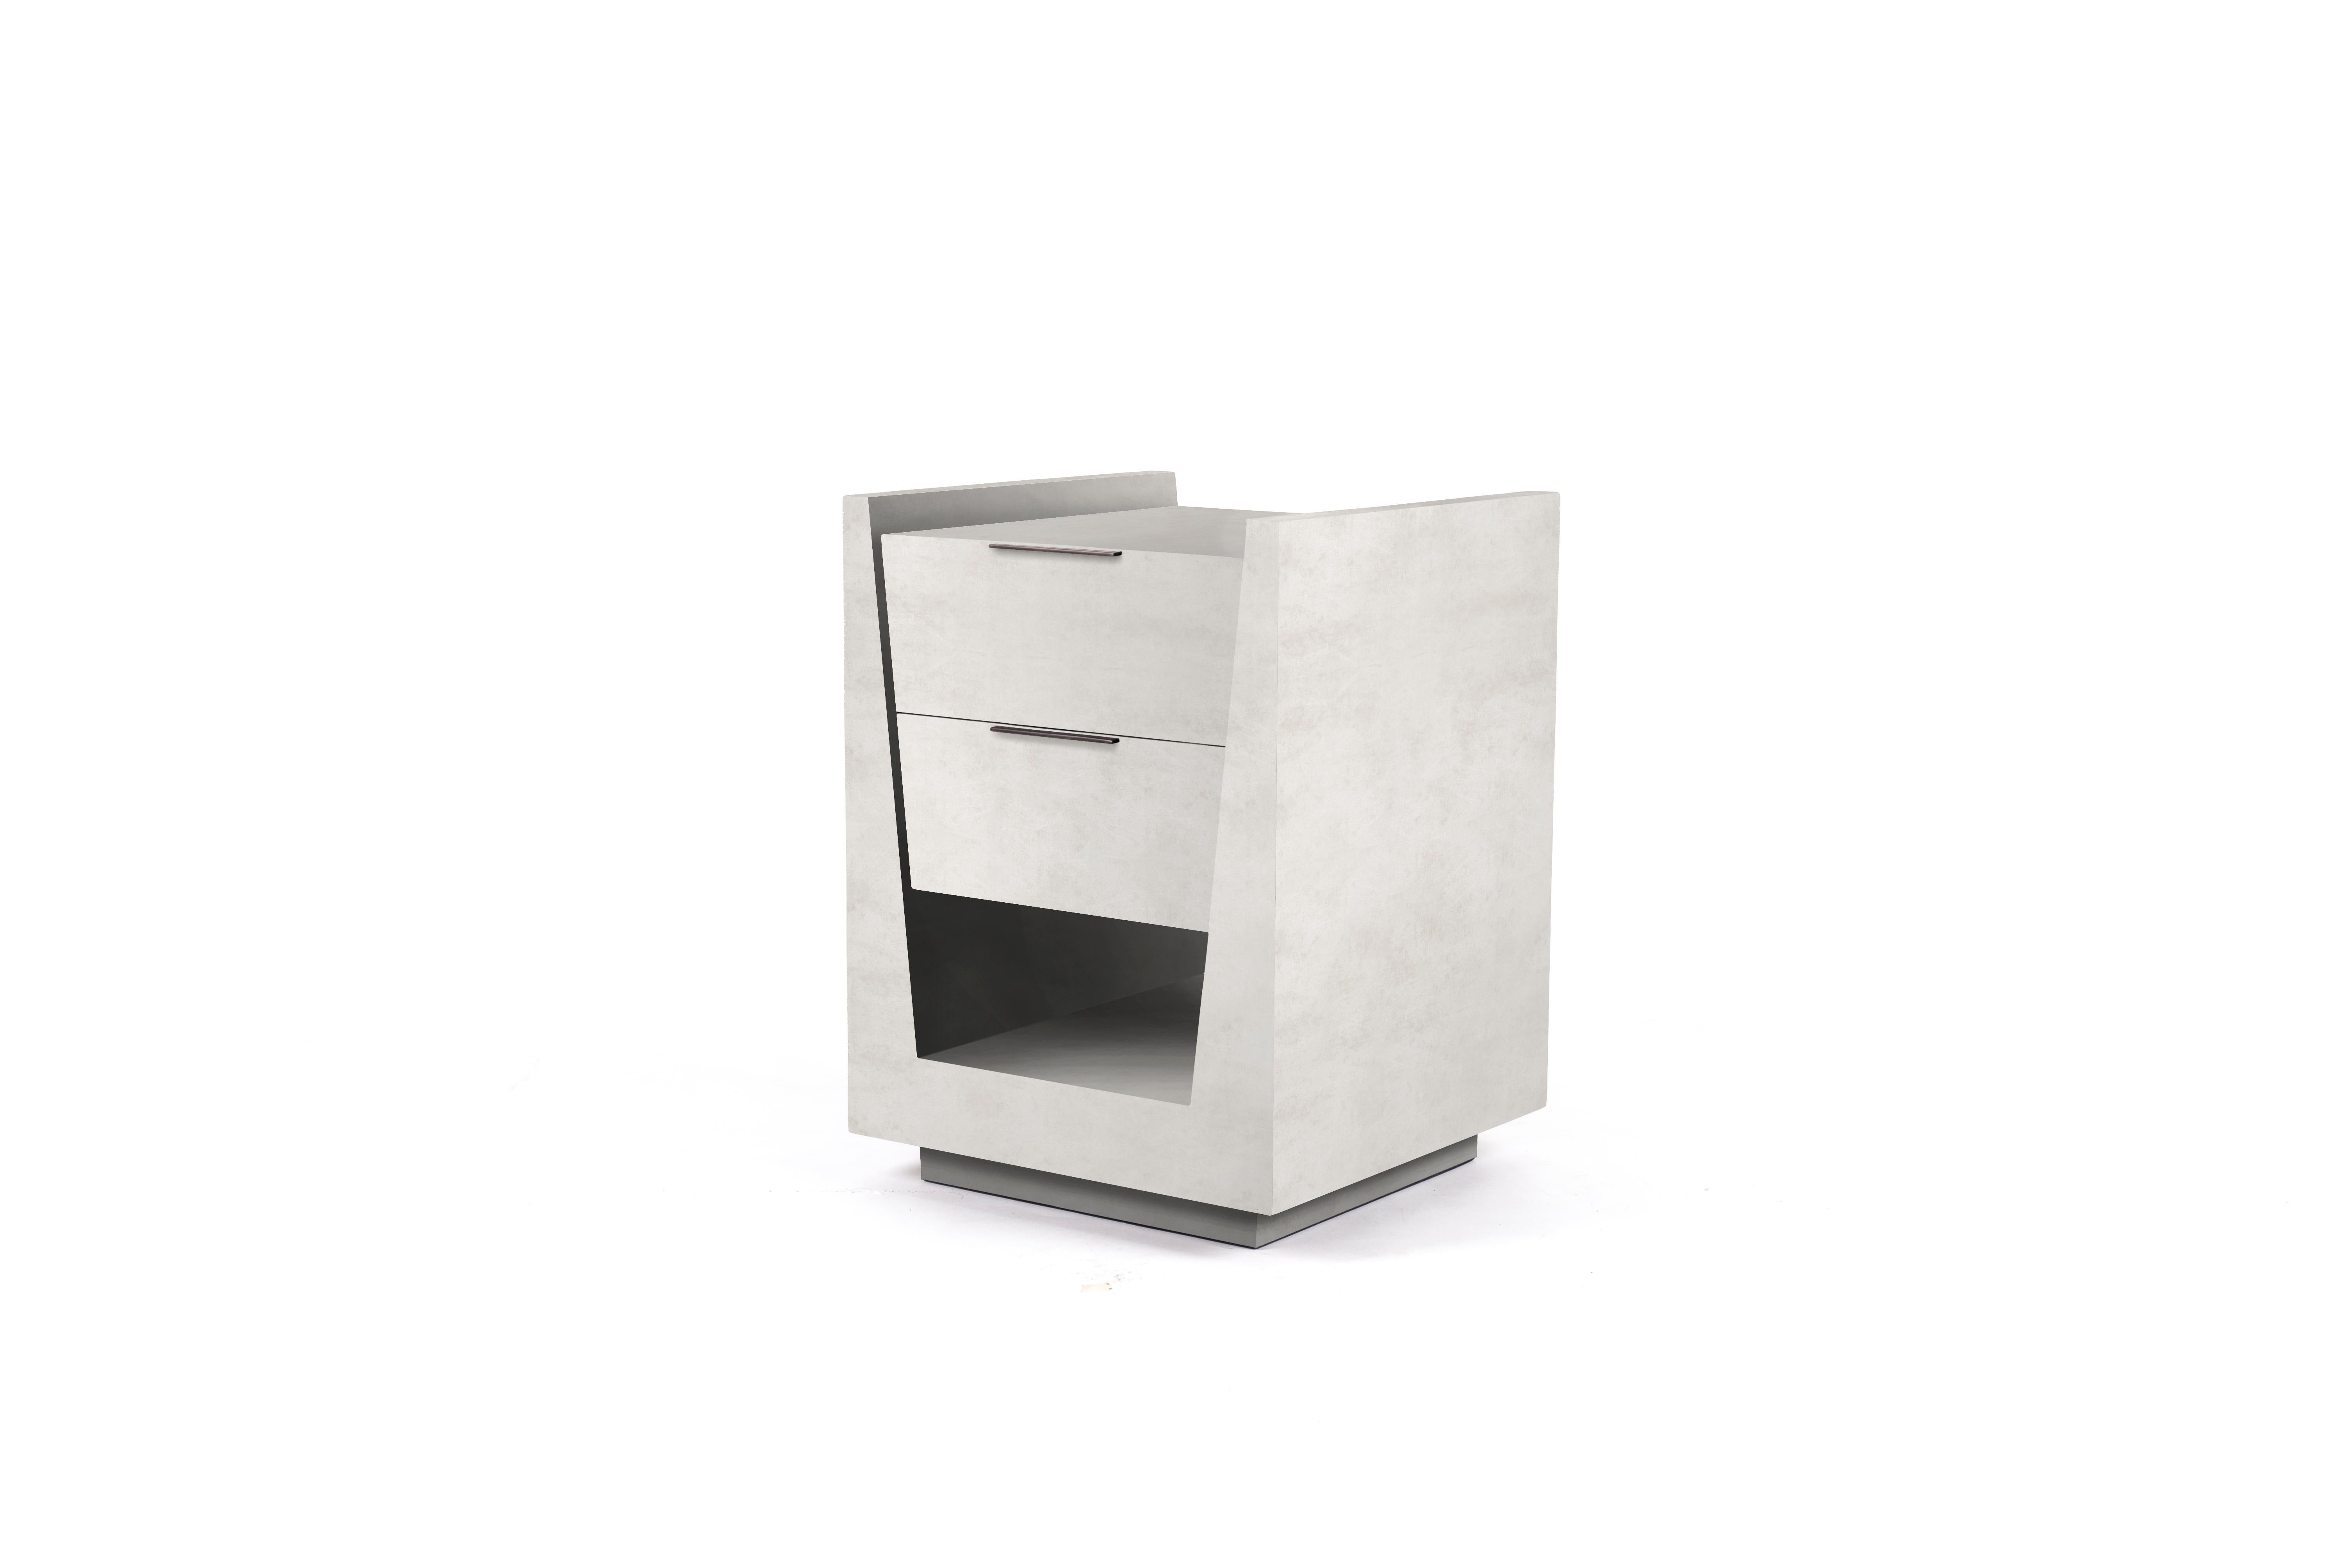 The Lola bedside by R & Y Augousti is an elegant piece with its subtle geometry. This bedside table is completely inlaid in cream parchment with discreet bronze-patina brass flat handles for the drawers. The drawers are inlaid in gemelina wood. This